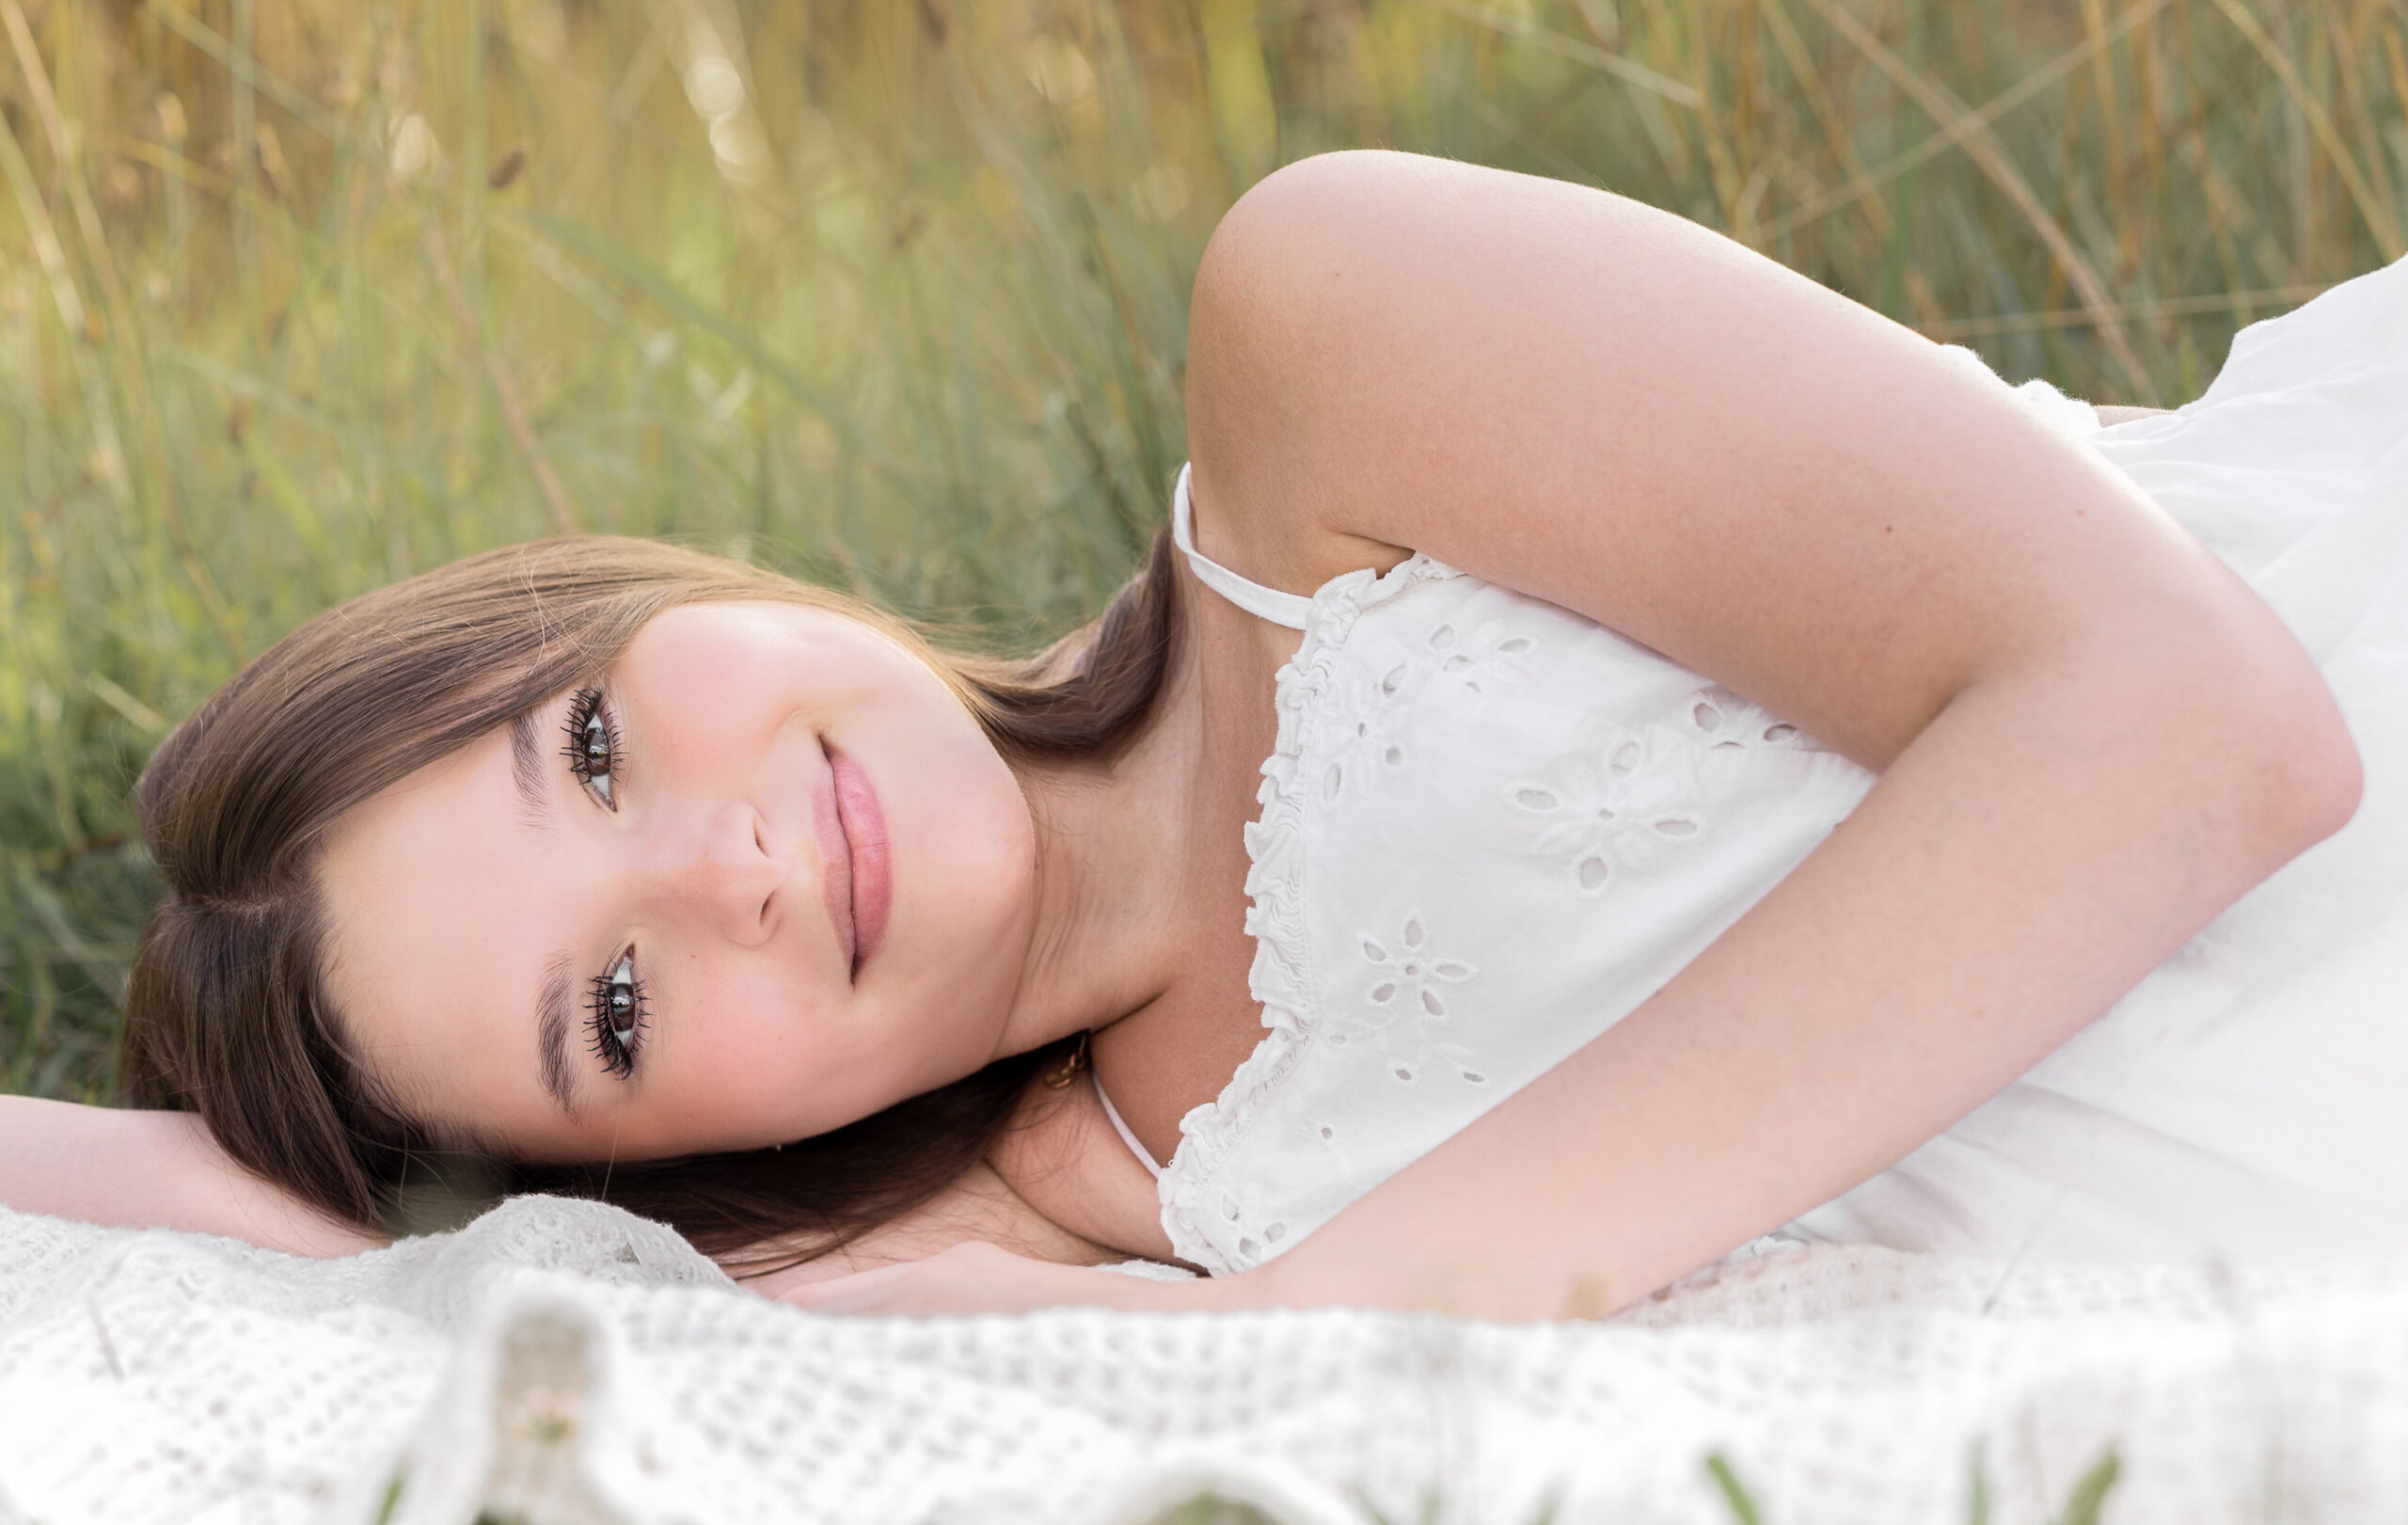 High School junior female laying on the floor on her side smiling at camera and wearing a white dress